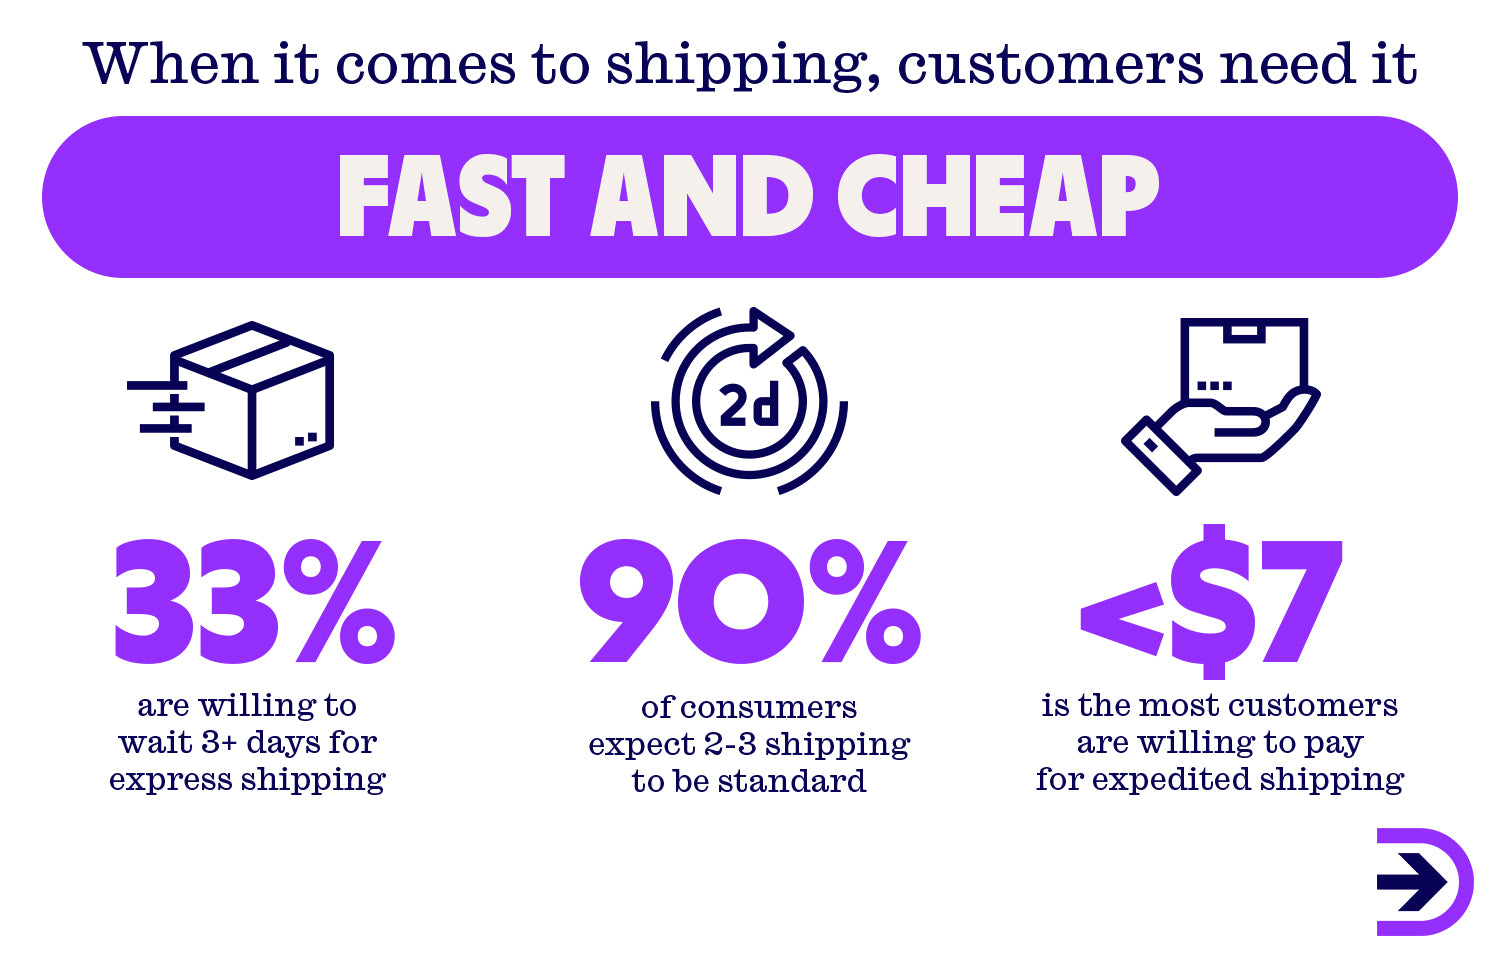 Customers are expecting fast and cheap delivery options across all ecommerce businesses, even when it comes to dropshipping.